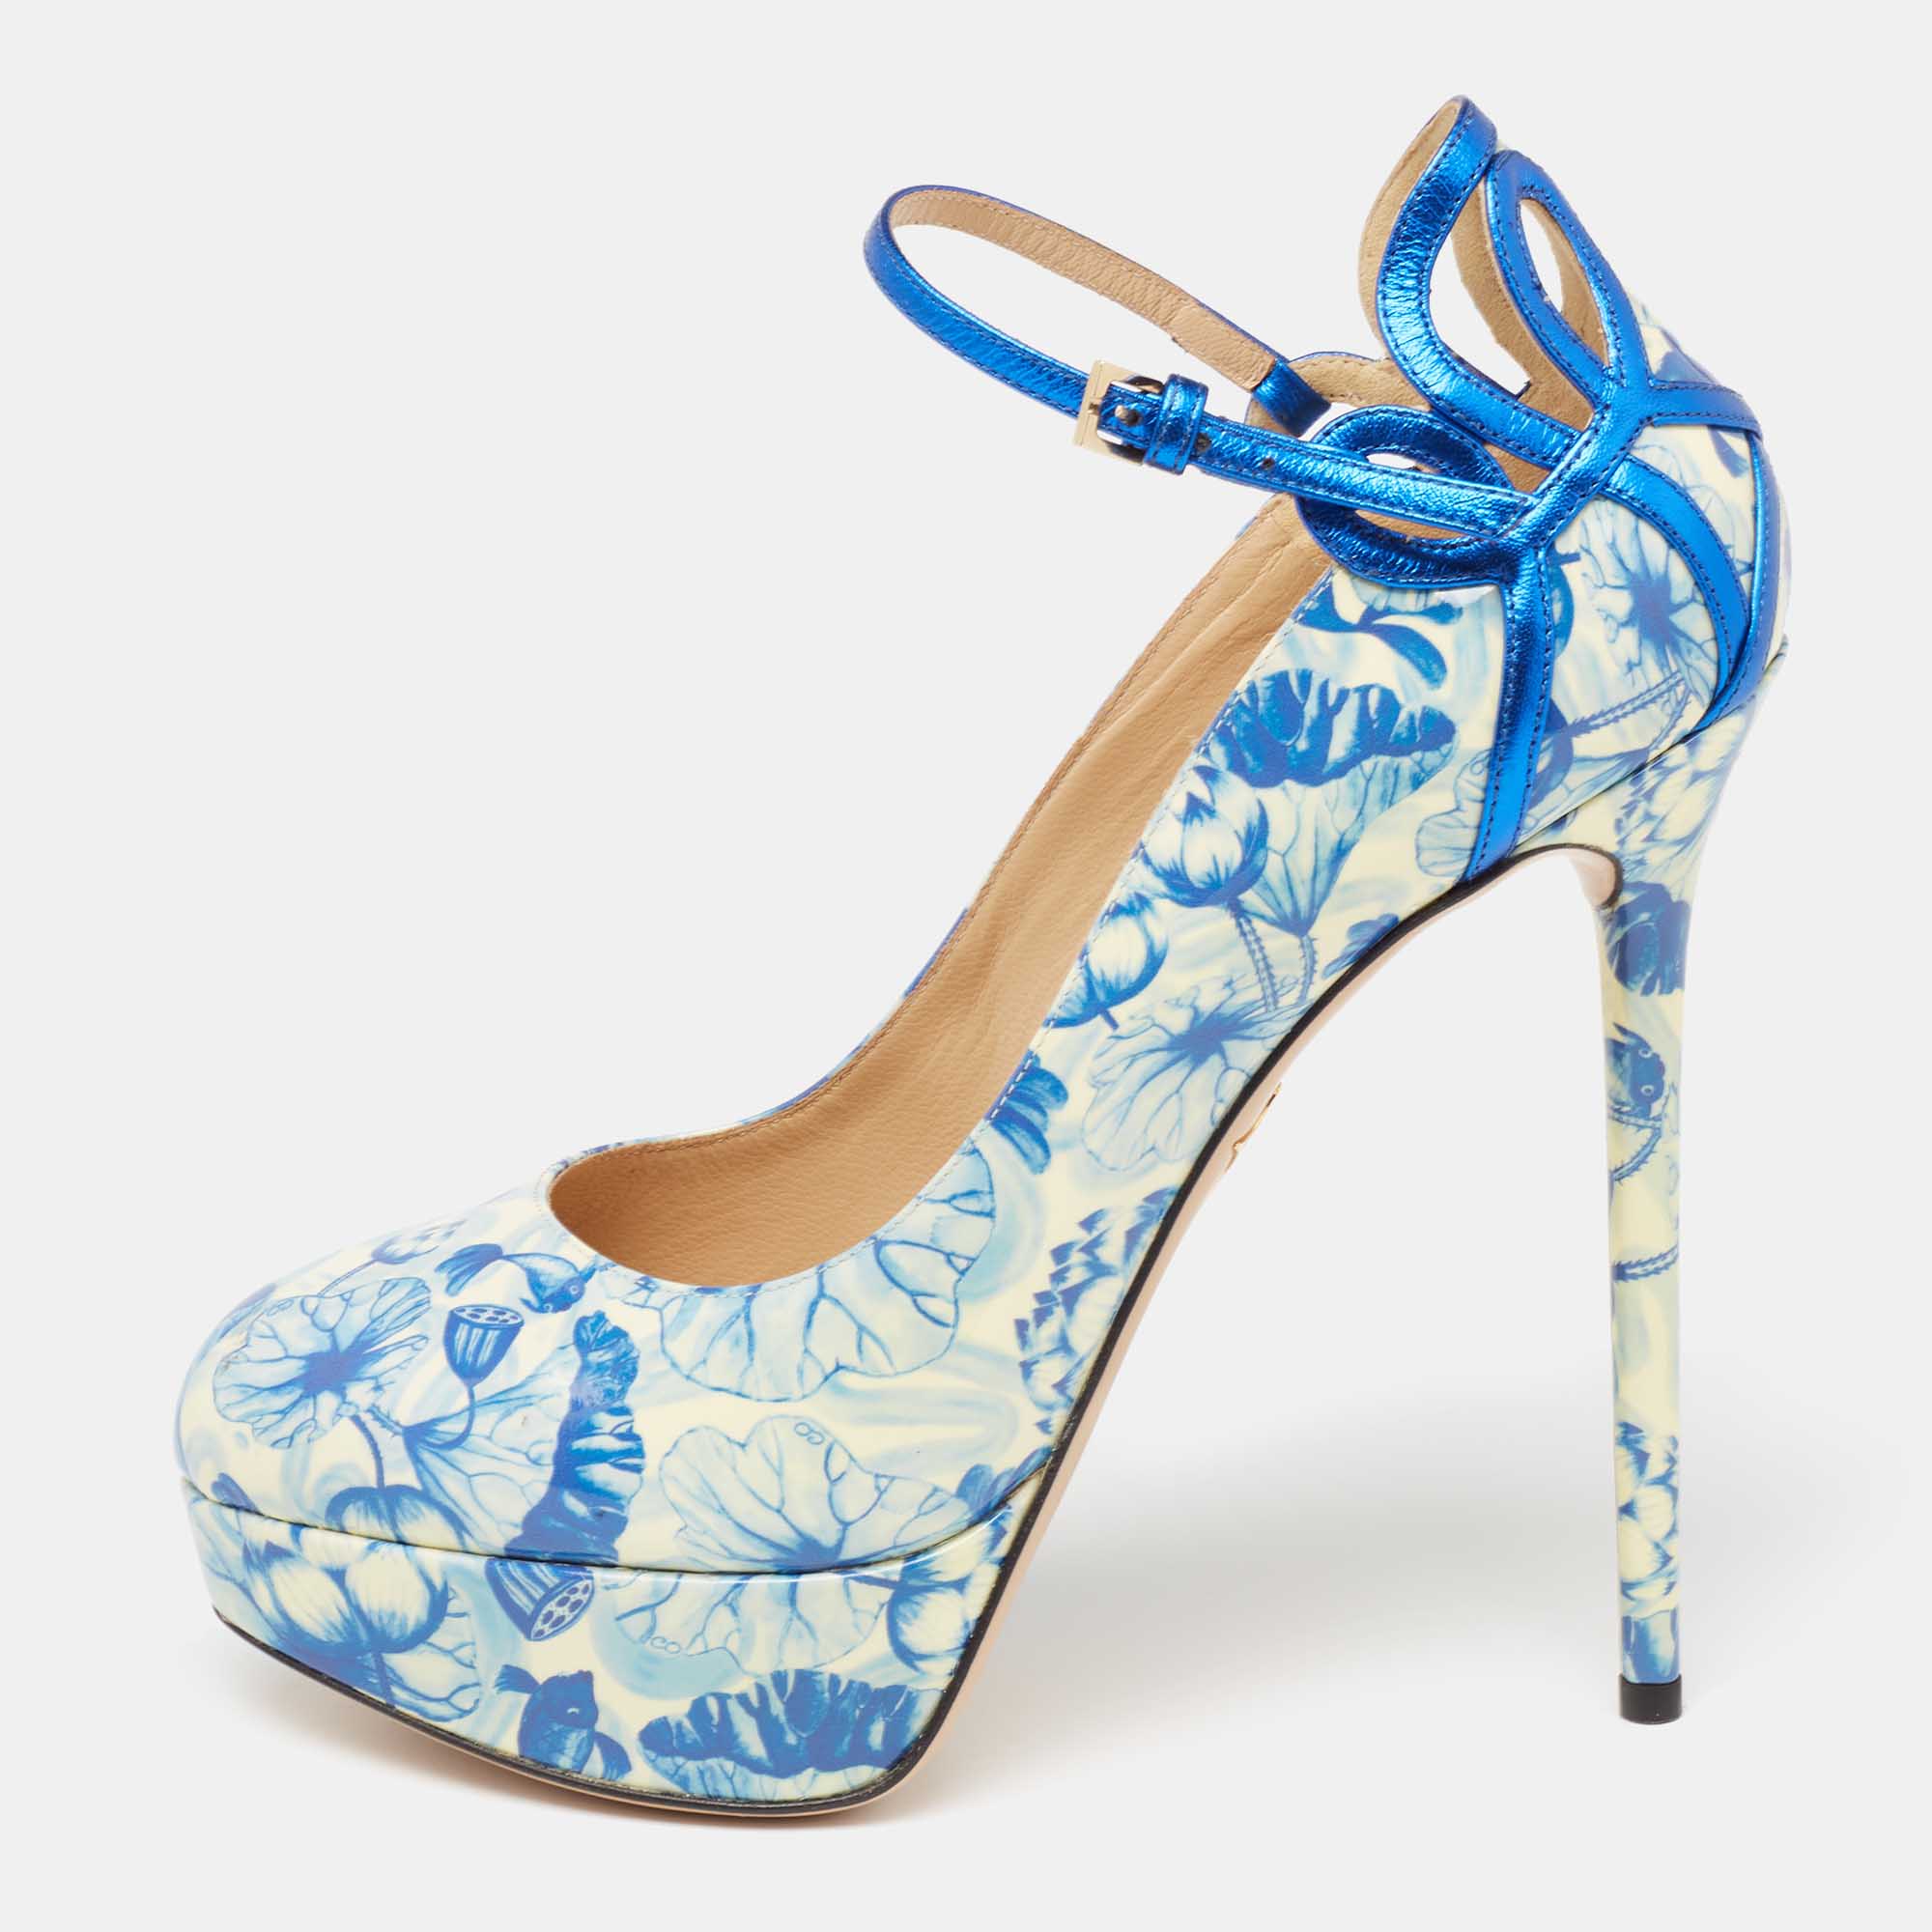 Released as part of their Shanghai Express collection these Charlotte Olympia pumps are crafted from patent leather and designed with Koi Carp prints. The beautiful shoes are balanced on platforms and slim heels.